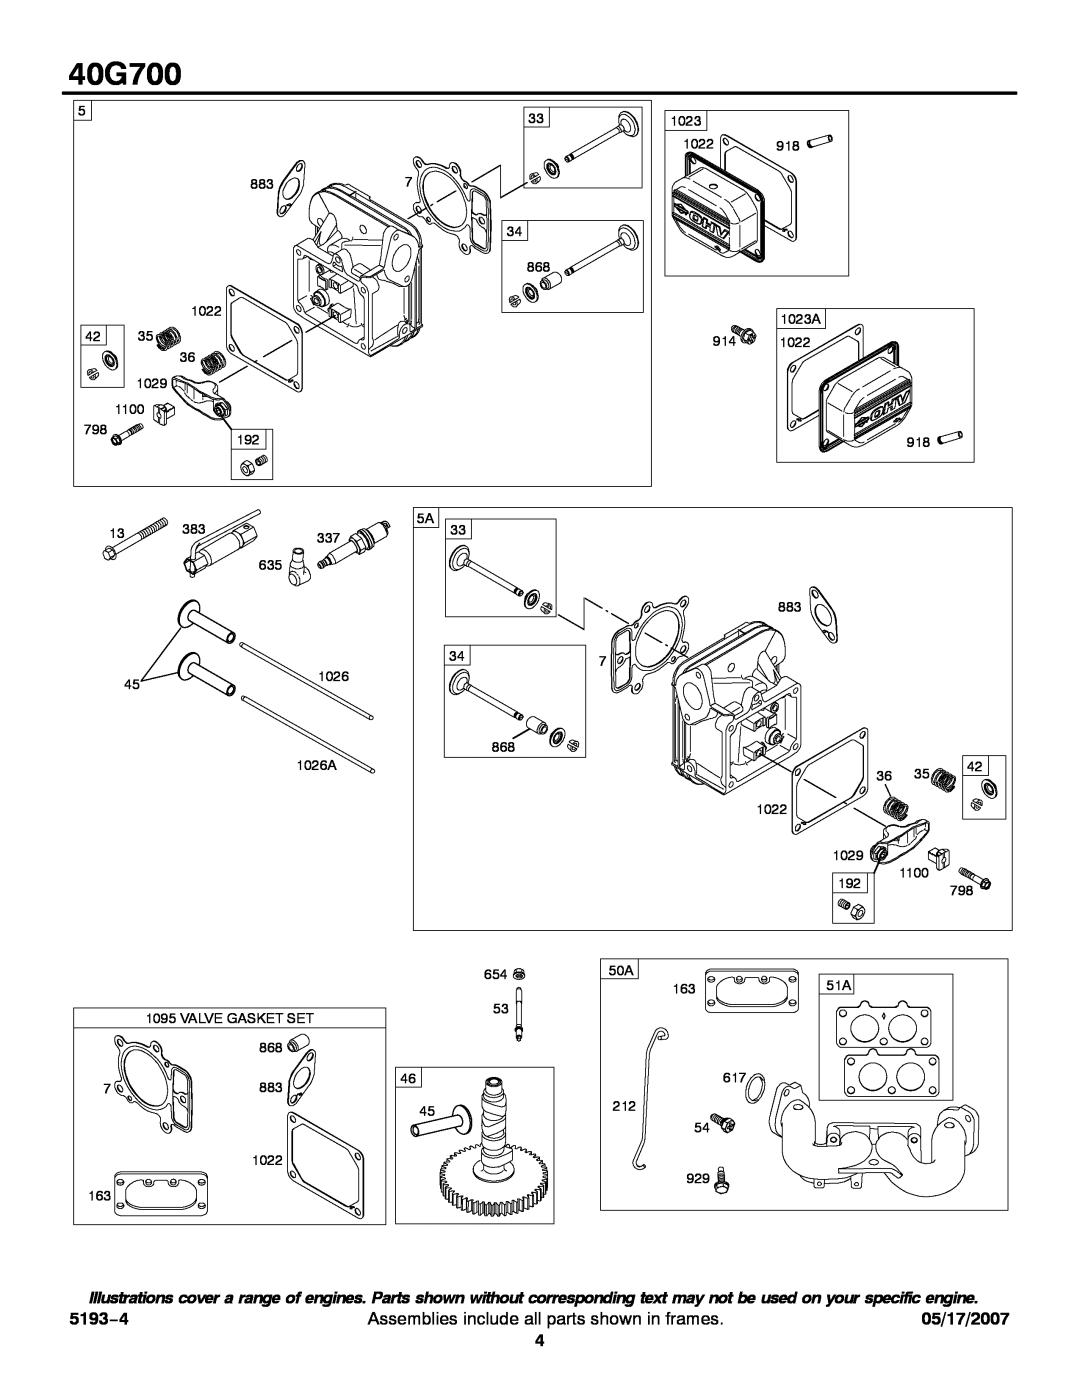 Briggs & Stratton 40G700 service manual 5193−4, Assemblies include all parts shown in frames, 05/17/2007 